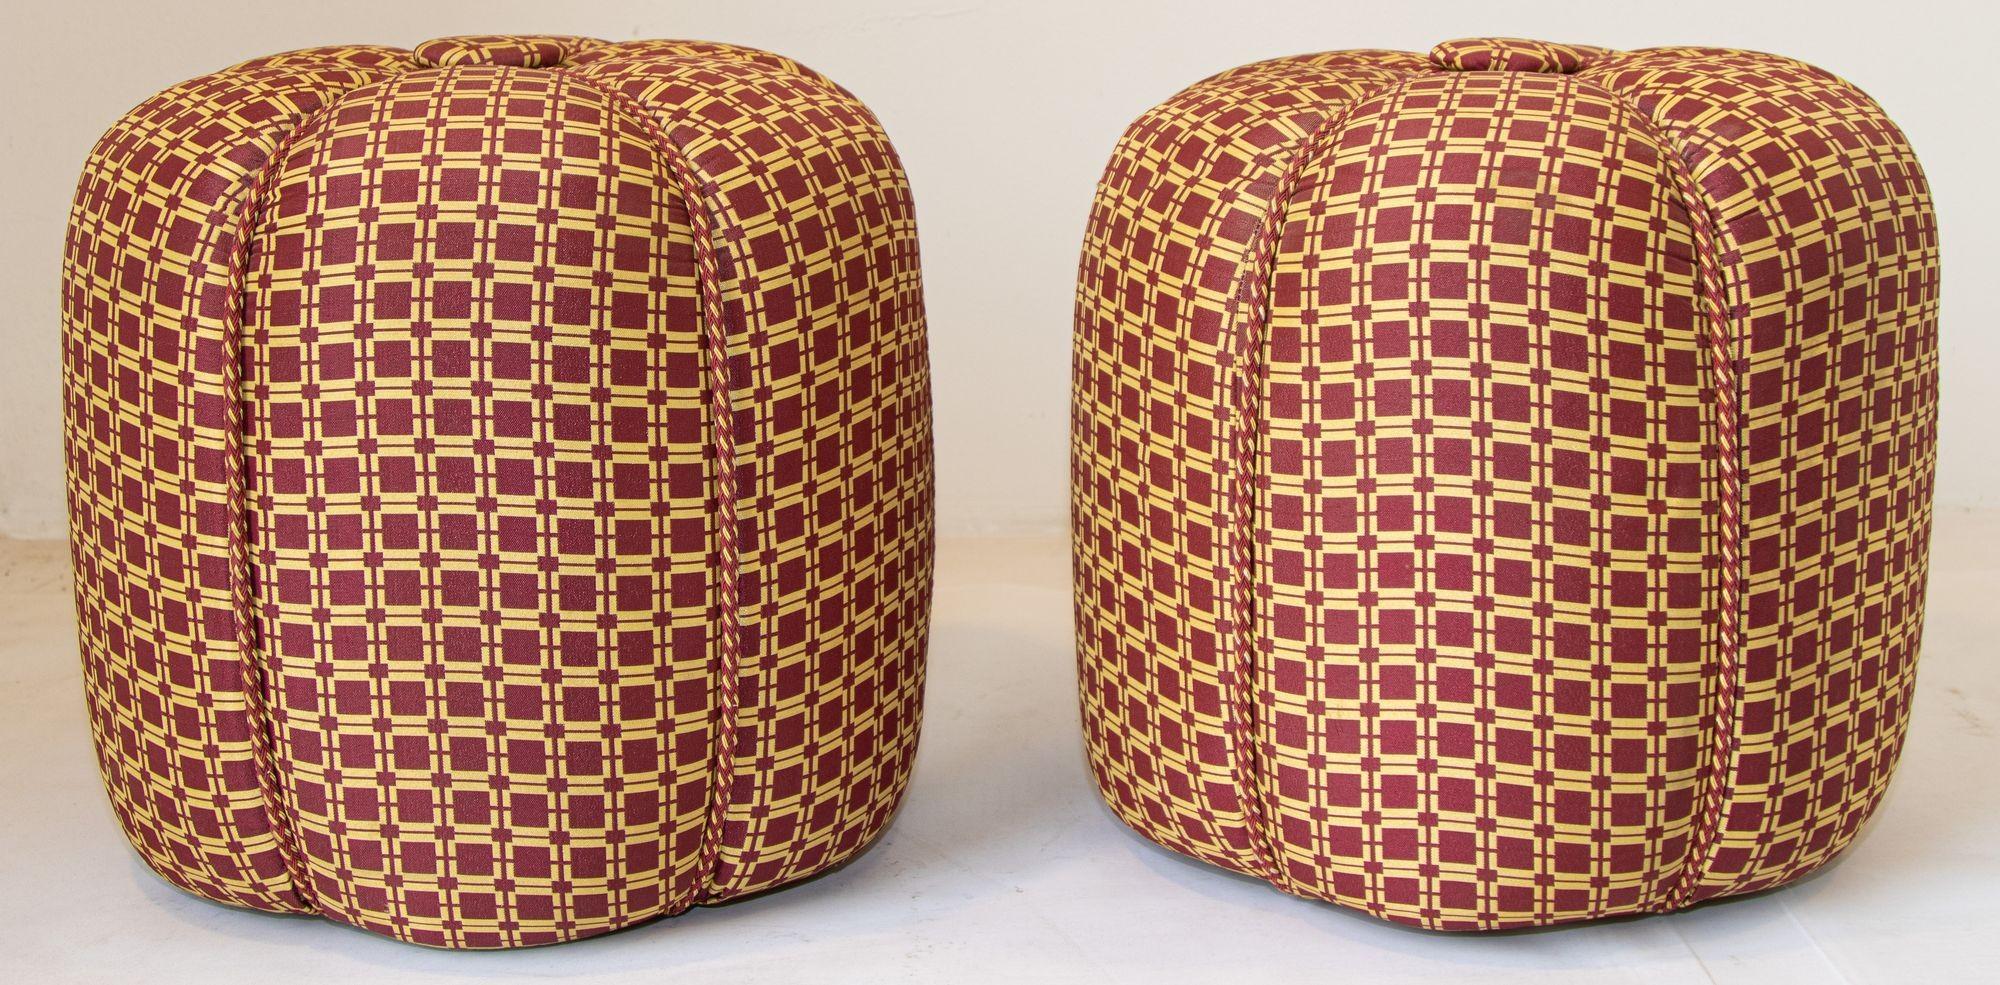 Pair of round vintage stools in red on gold fabric upholstery in the style of Jindrich Halabala for UP Závody.
Vintage Art Deco style little pouf hassock, upholstered footstool circular ottoman. 
This versatile accent piece, pouf is designed